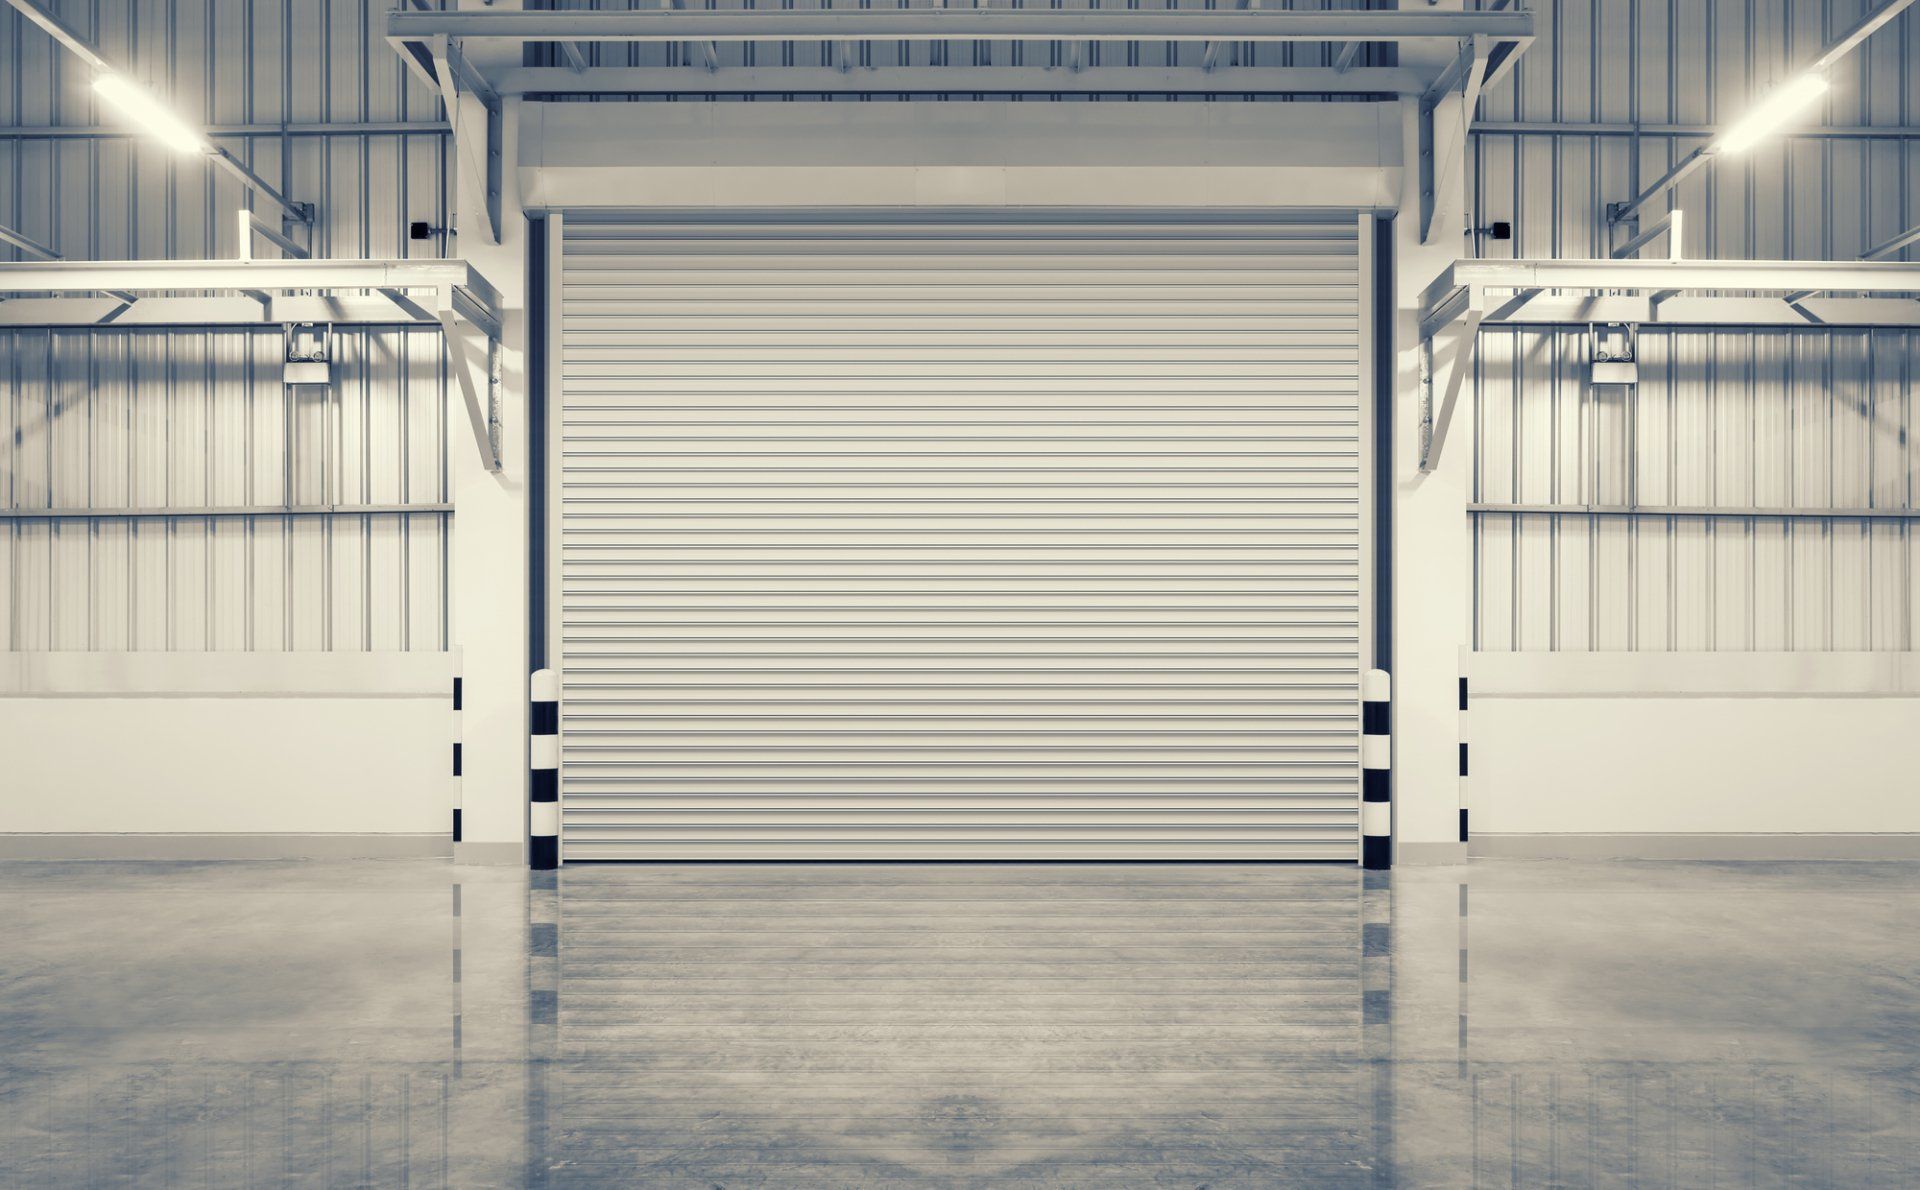 Commercial Entry Doors in Oklahoma City, OK | A Plus Door and Gate Services LLC